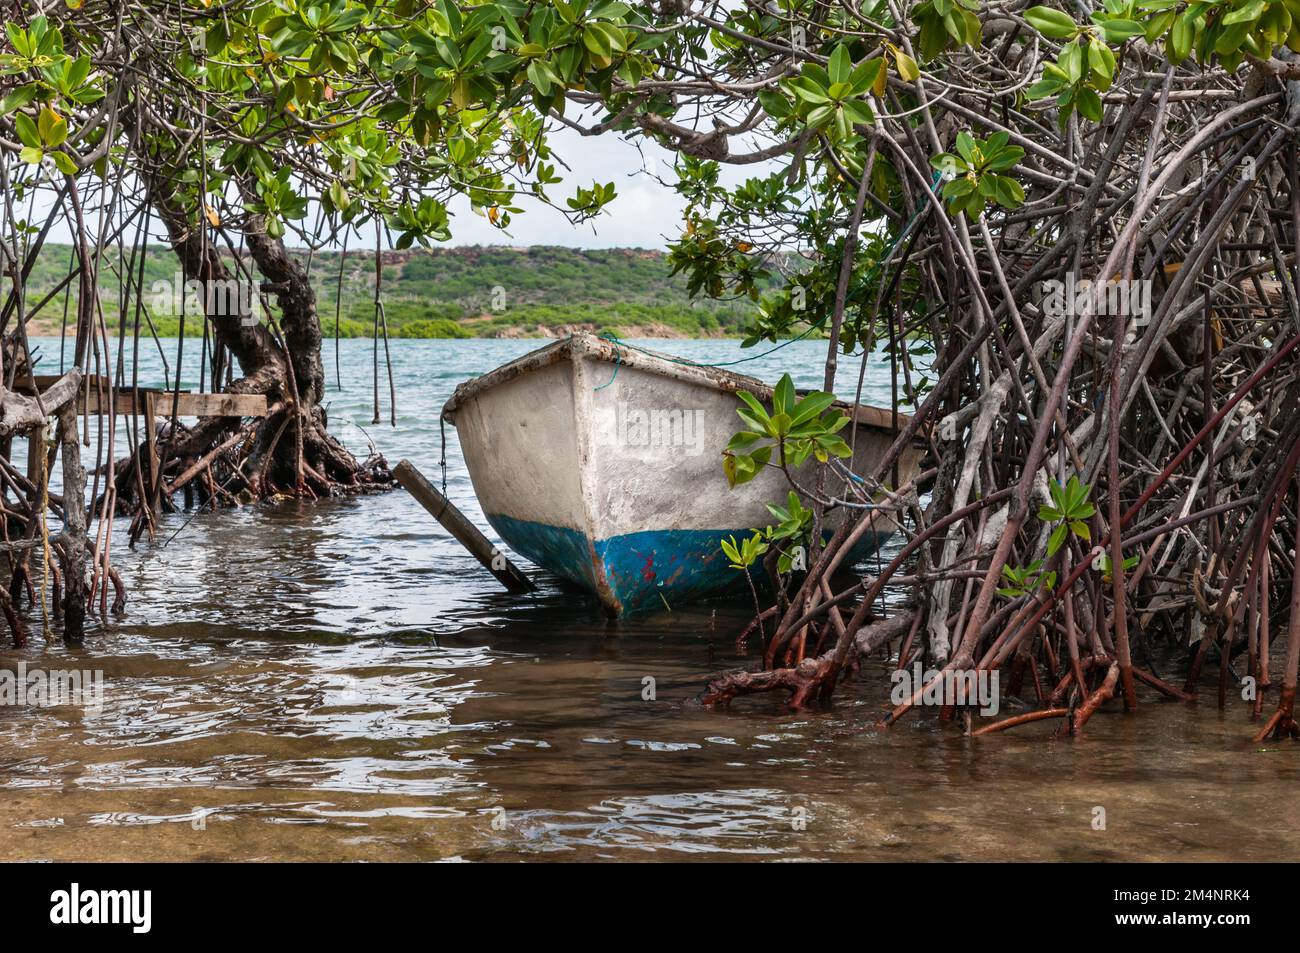 A rusty white and blue boat lies moored at the mangrove trees on the shore of St. Joris Bay at the caribbean island Curacao. Stock Photo